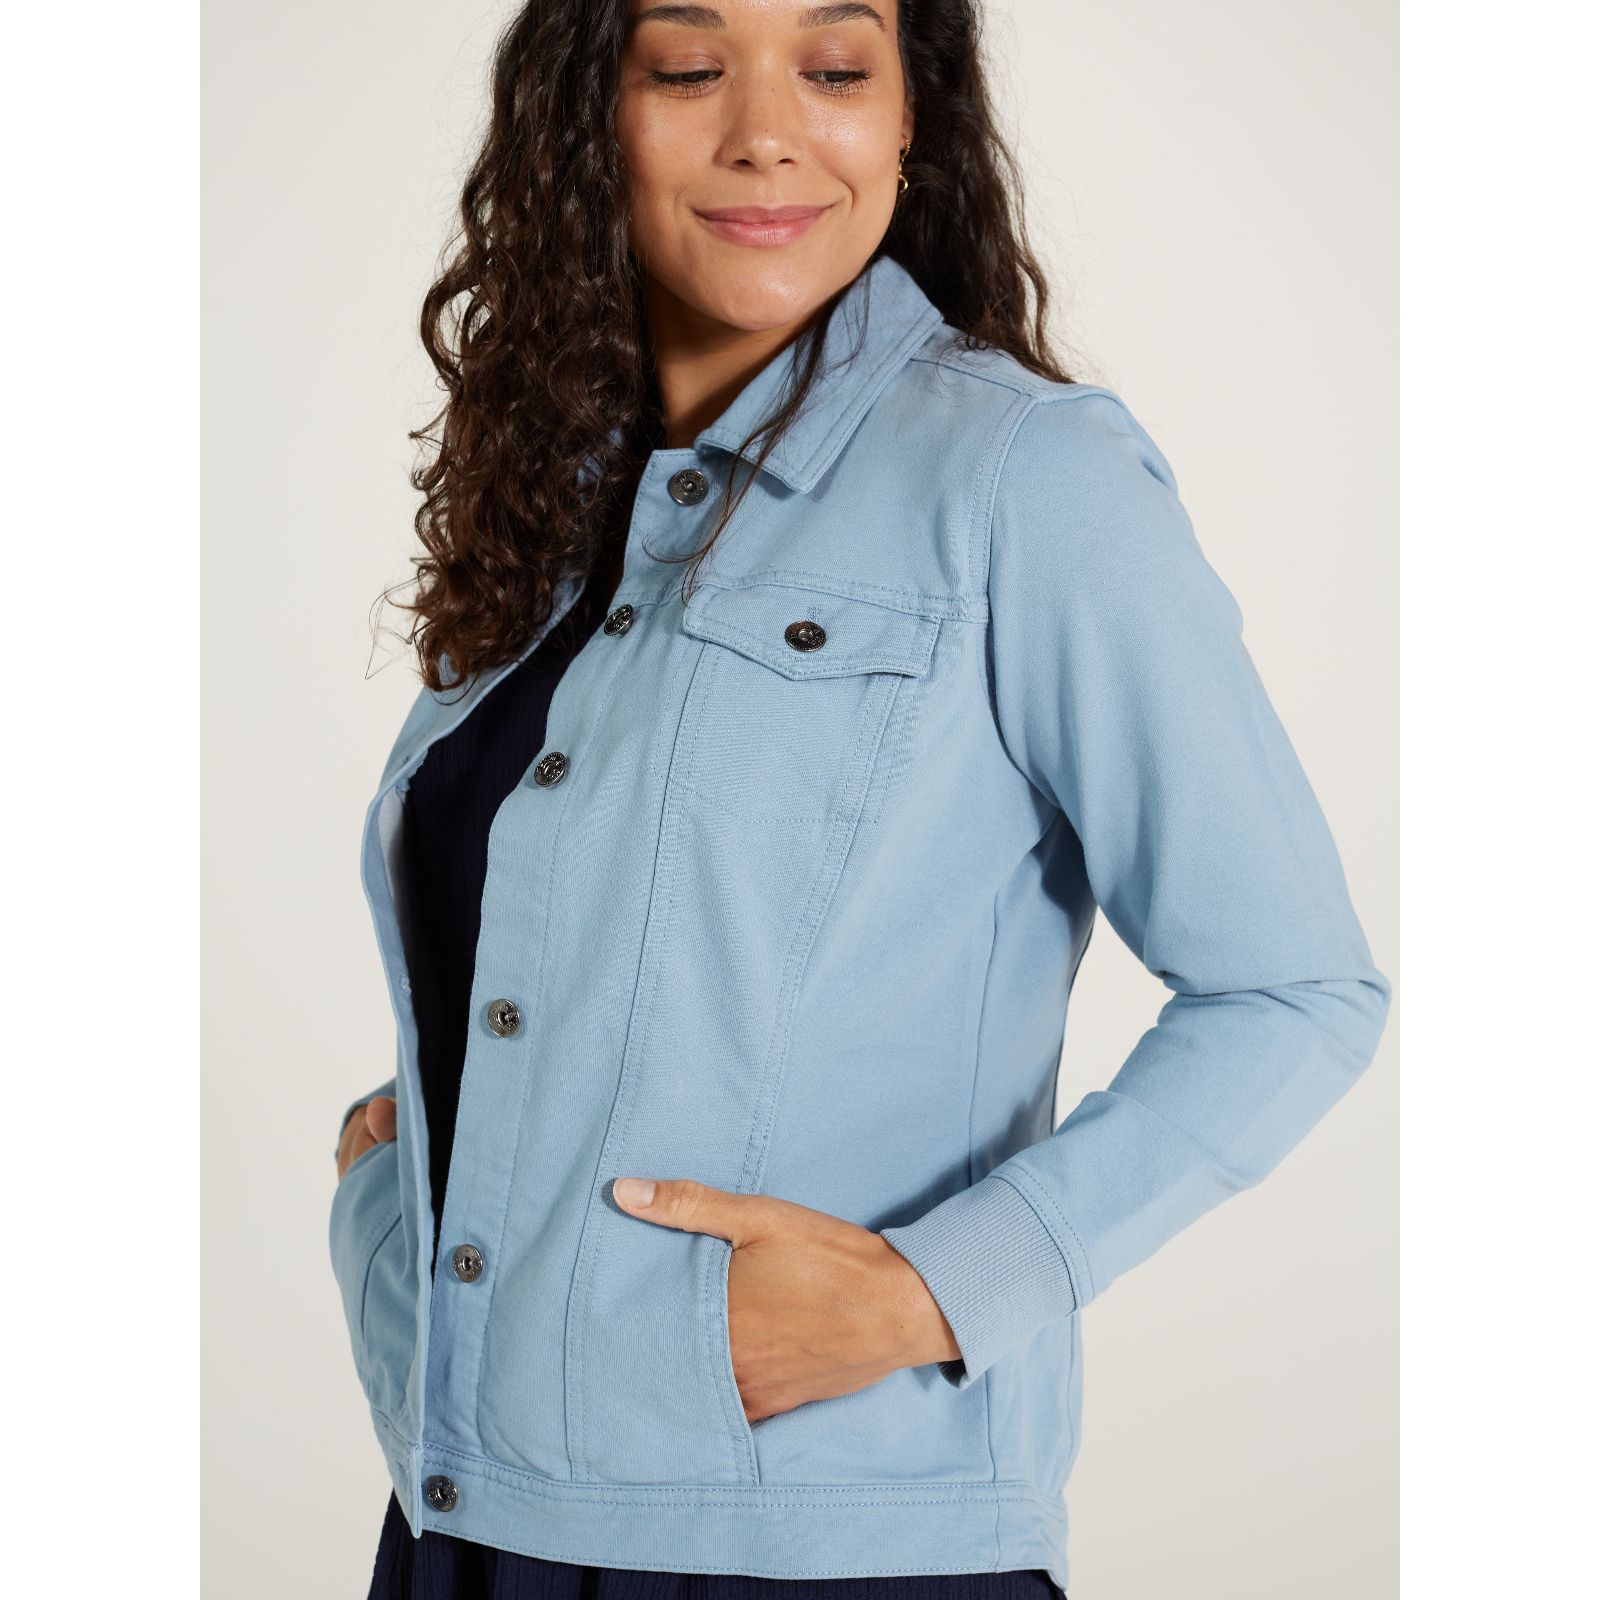 Denim And Co, Shop this range of stylishly casual tops, jackets